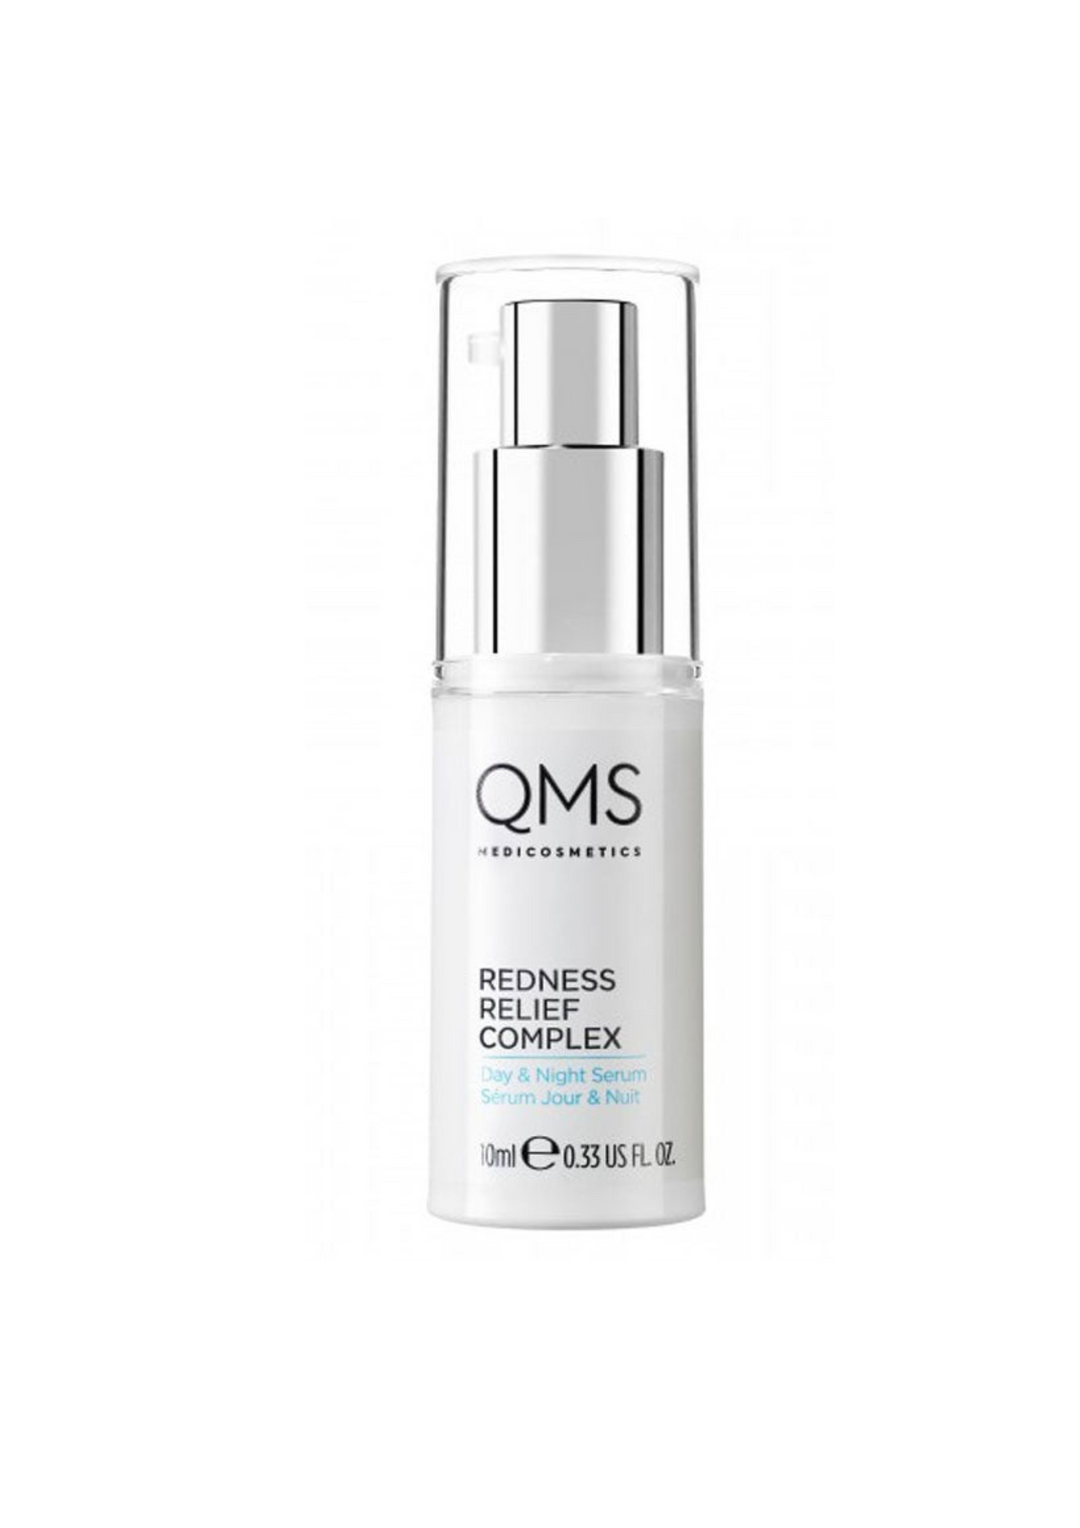 Redness Relief Complex 10 ml (discover size)